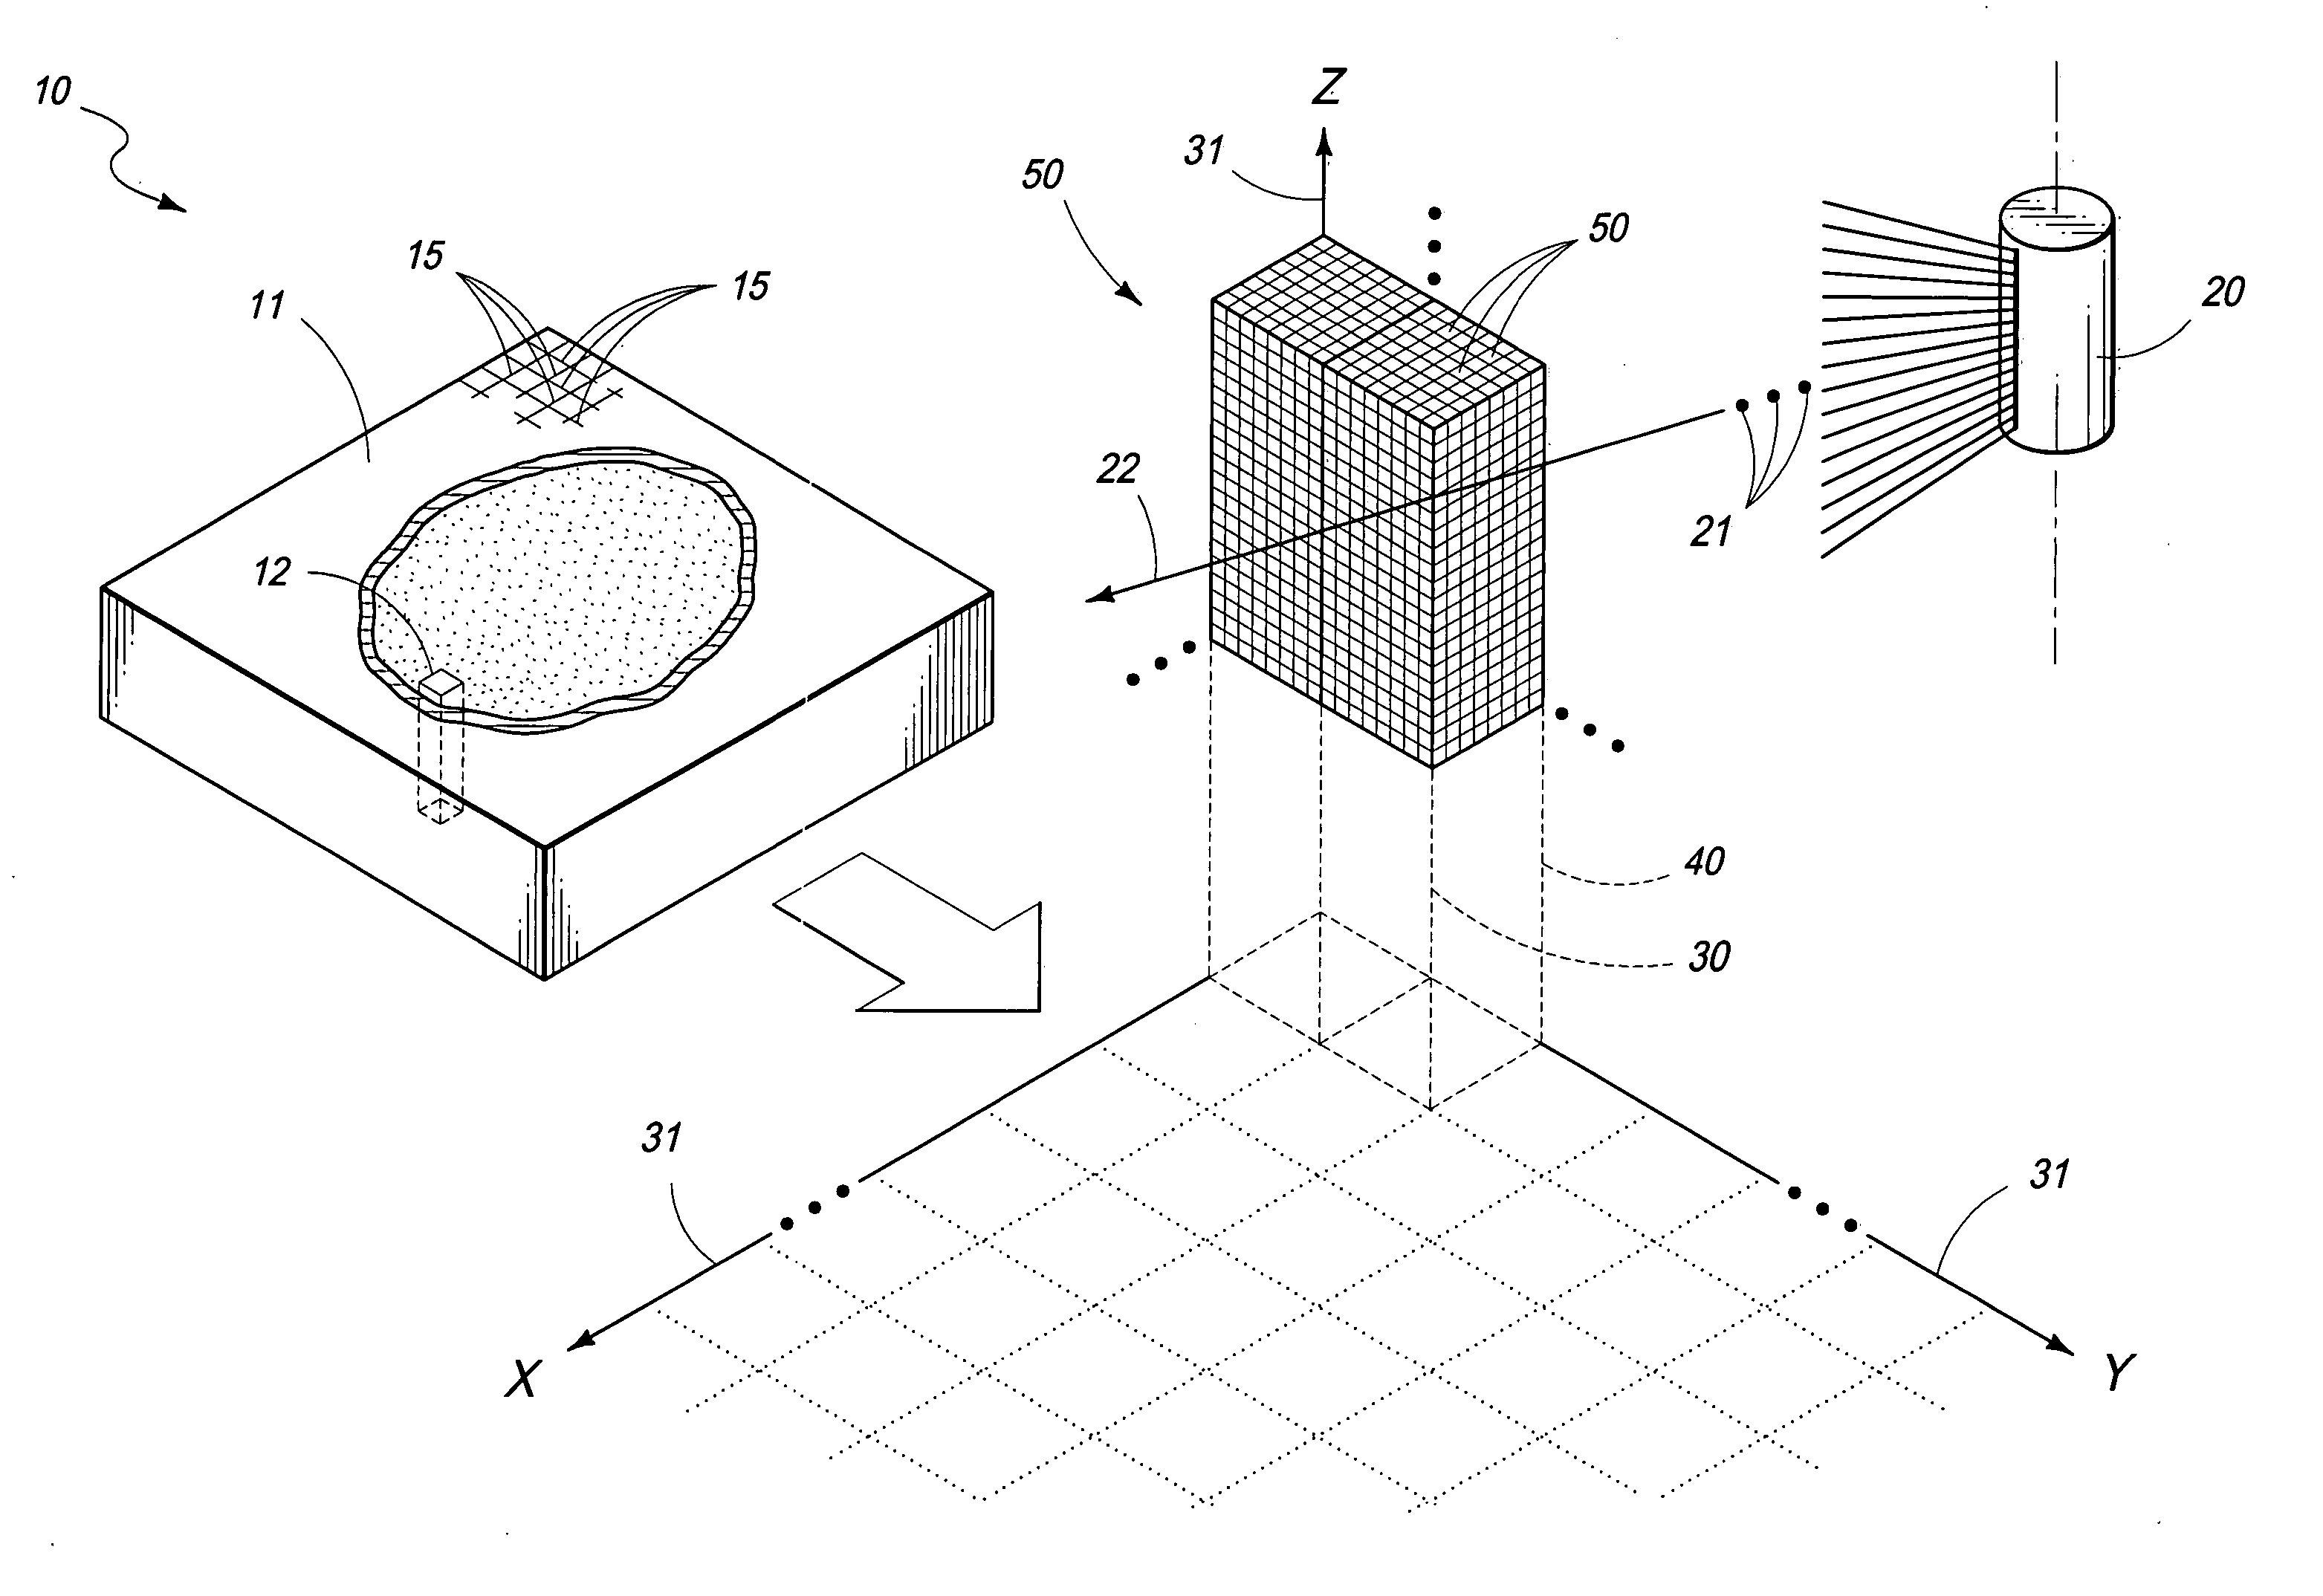 Method for tracking the movement of a particle through a geometric model for use in radiotherapy